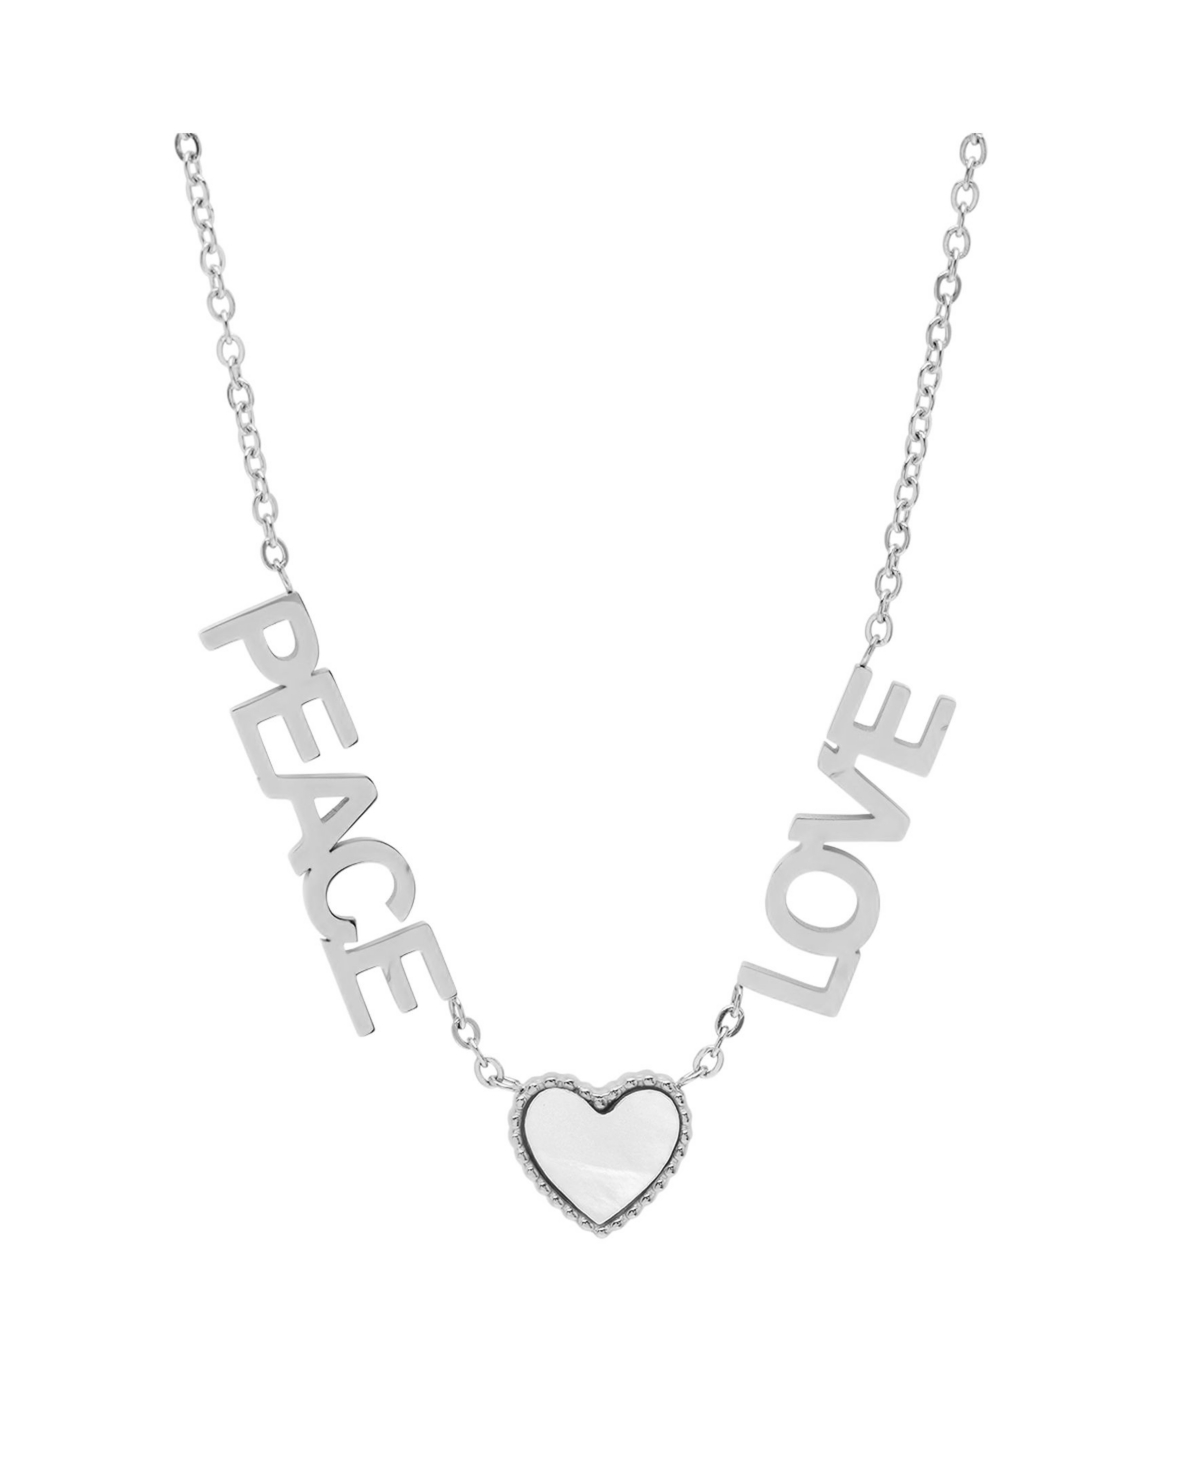 Stainless Steel Peace Love Drop Necklace with Heart Charm - Silver-Plated